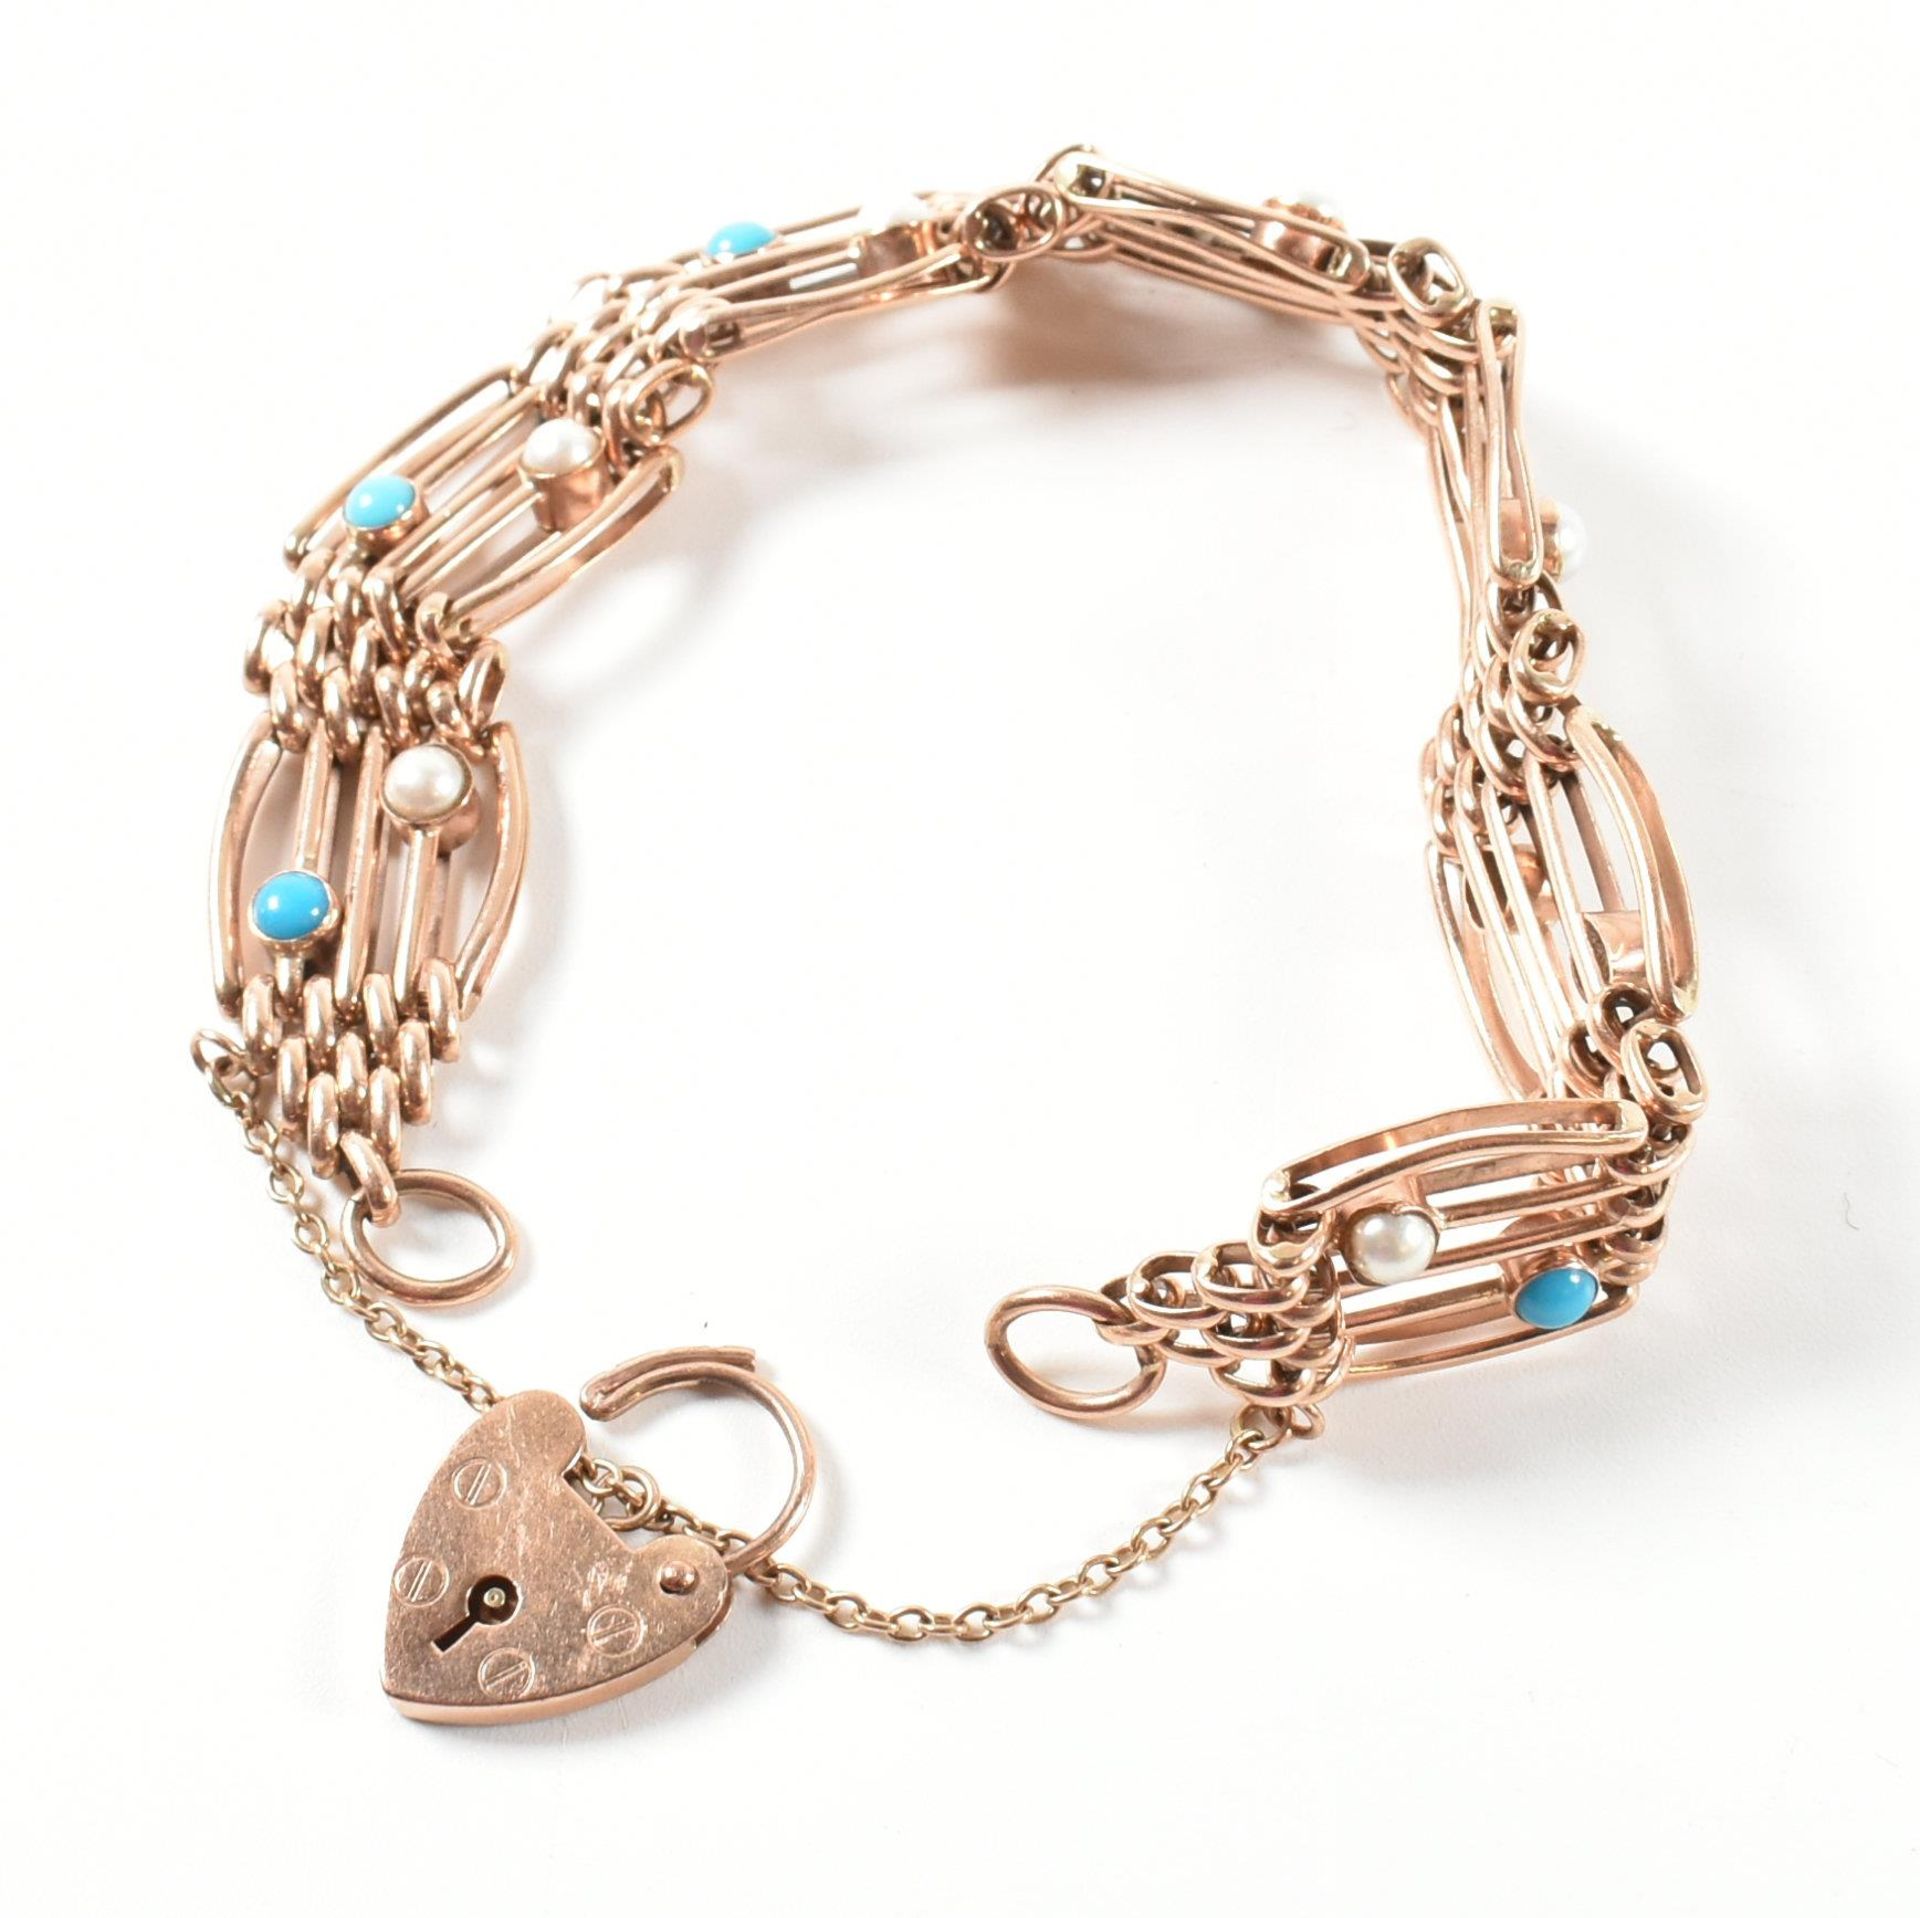 HALLMARKED 9CT ROSE GOLD PEARL & TURQUOISE GATE LINK BRACELET - Image 7 of 9